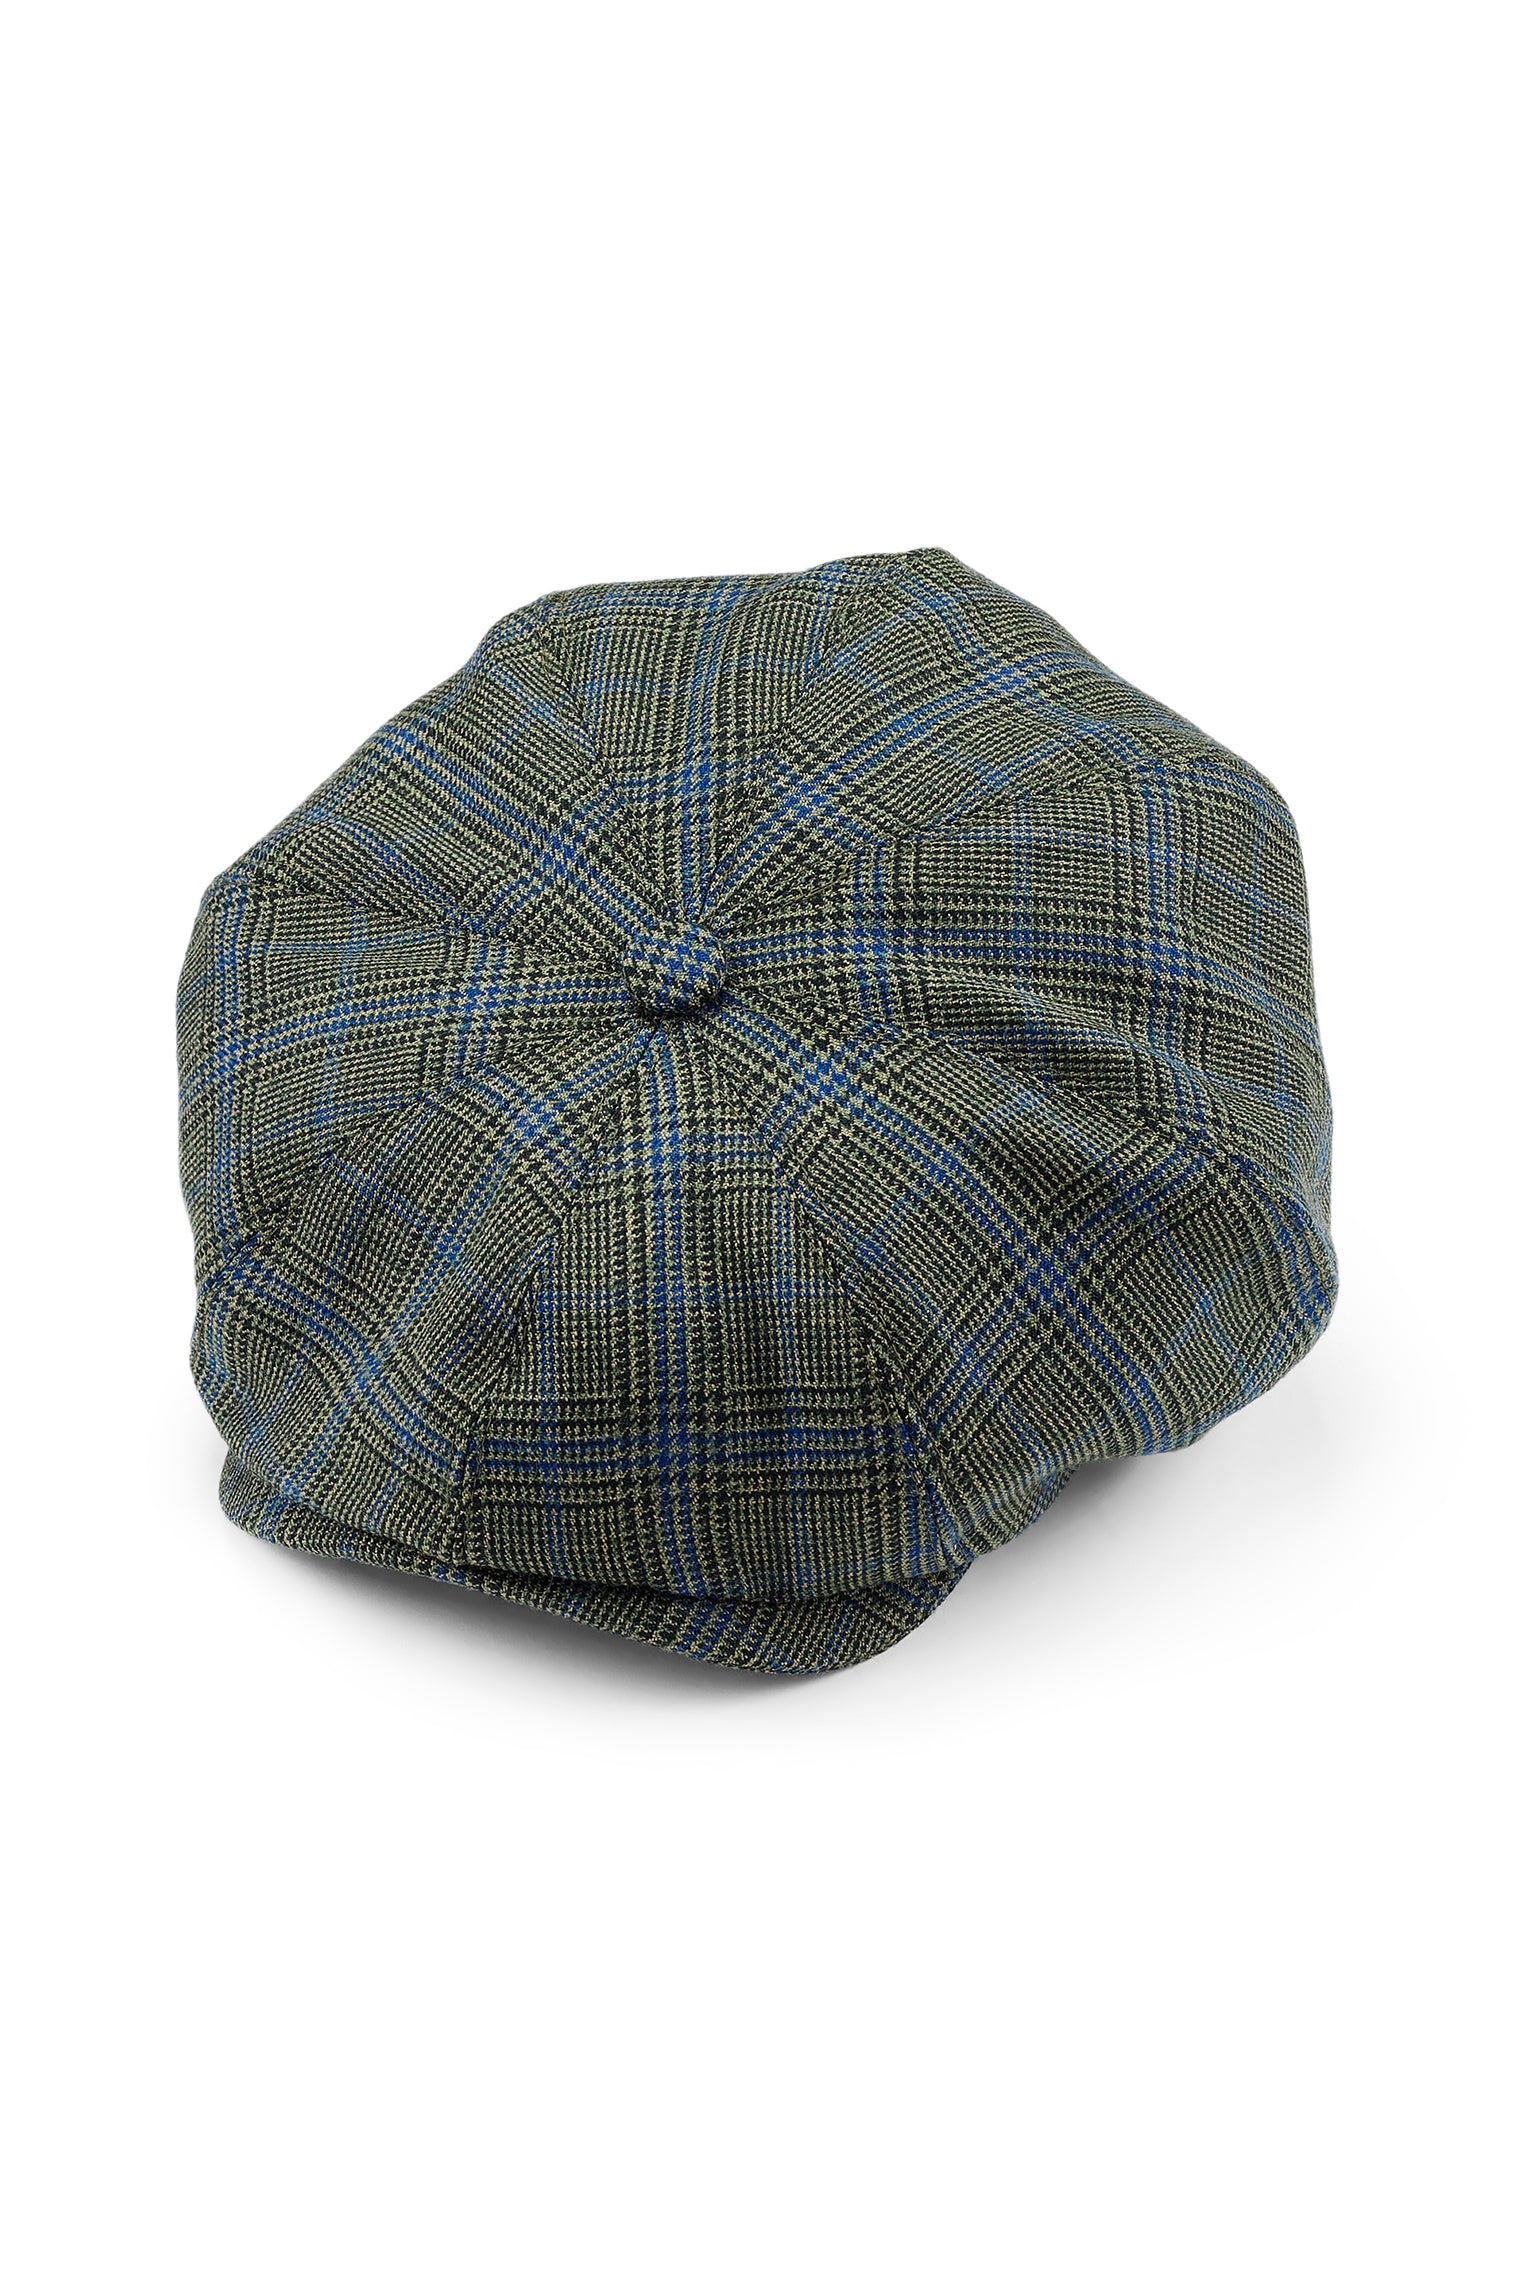 Highgrove Green Bakerboy Cap - Limited Edition Collection - Lock & Co. Hatters London UK